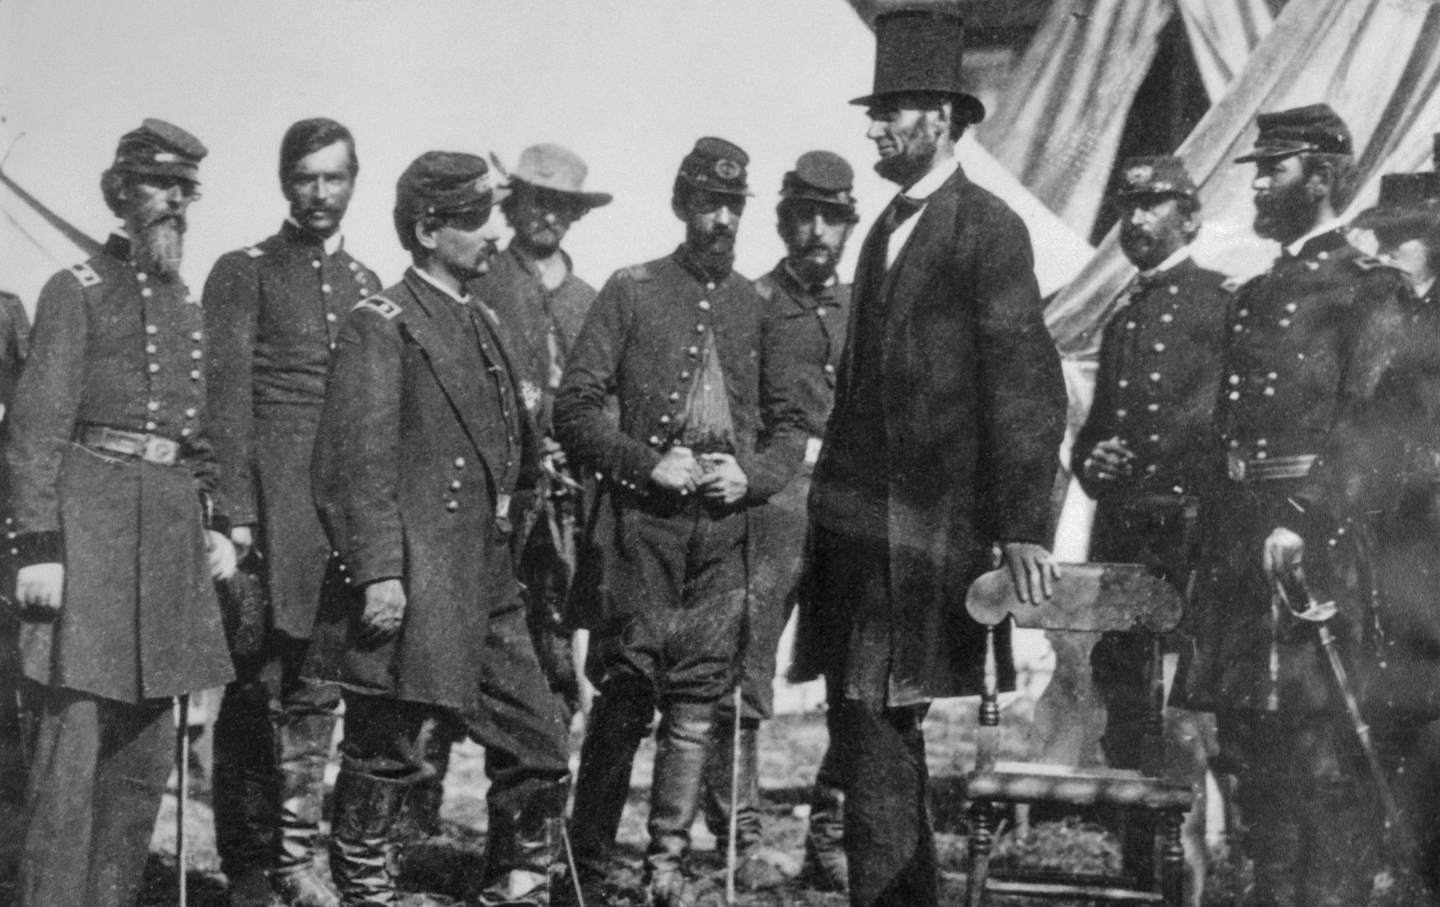 Abraham Lincoln pictured with a group of soldiers during the Civil War